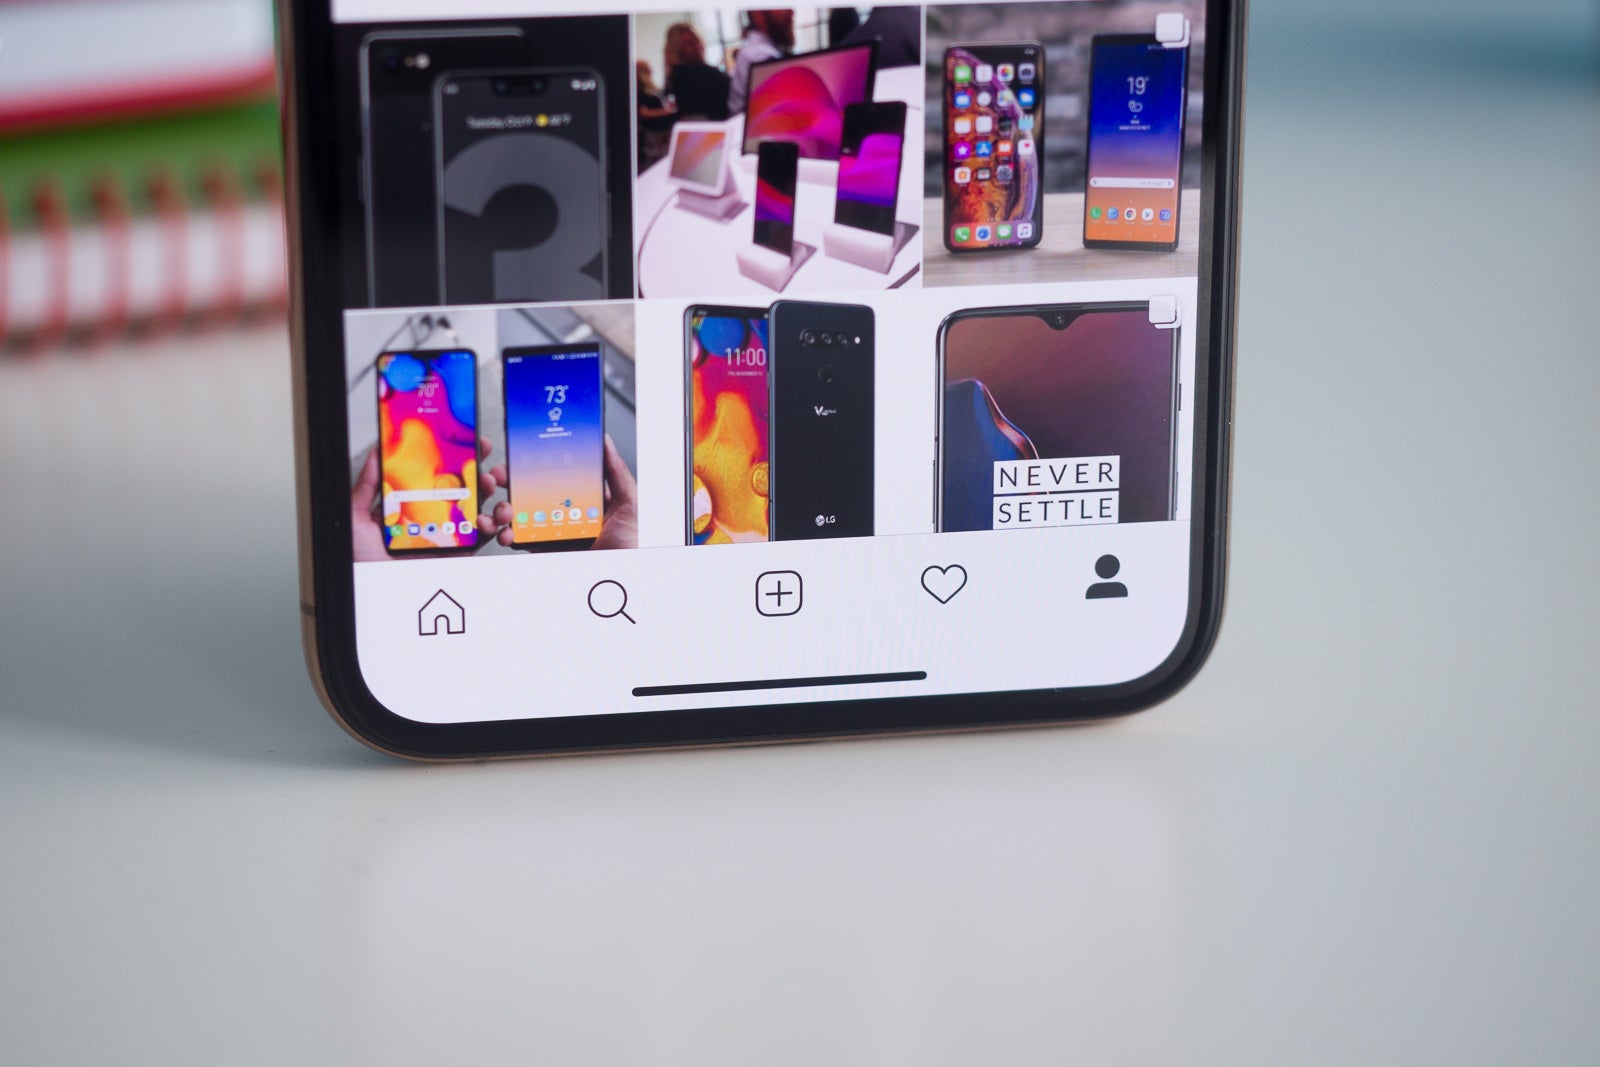 Instagram finally working on showing real content in its search results page